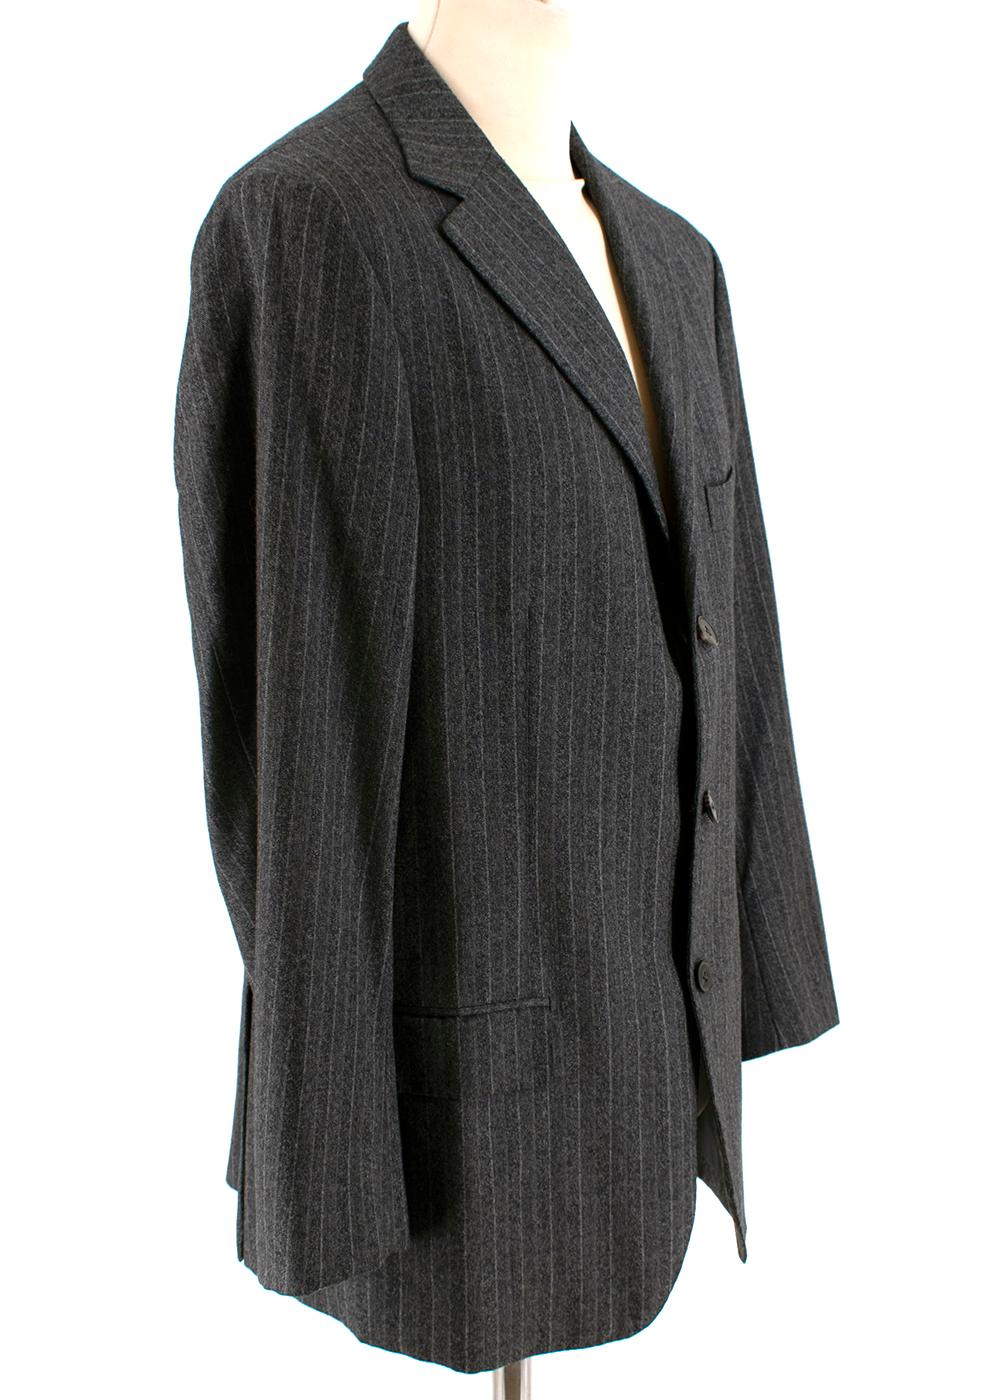 Ermenegildo Zegna Wool Grey Striped Single Breasted Suit 

-Luxurious soft texture
-Classic cut
(Jacket)
-Fully lined
-3 functional outer pockets 
-3 functional inner pockets 
-1 doble pen pocket 
(Pants)
-4 pocket design 
-Front pockets have